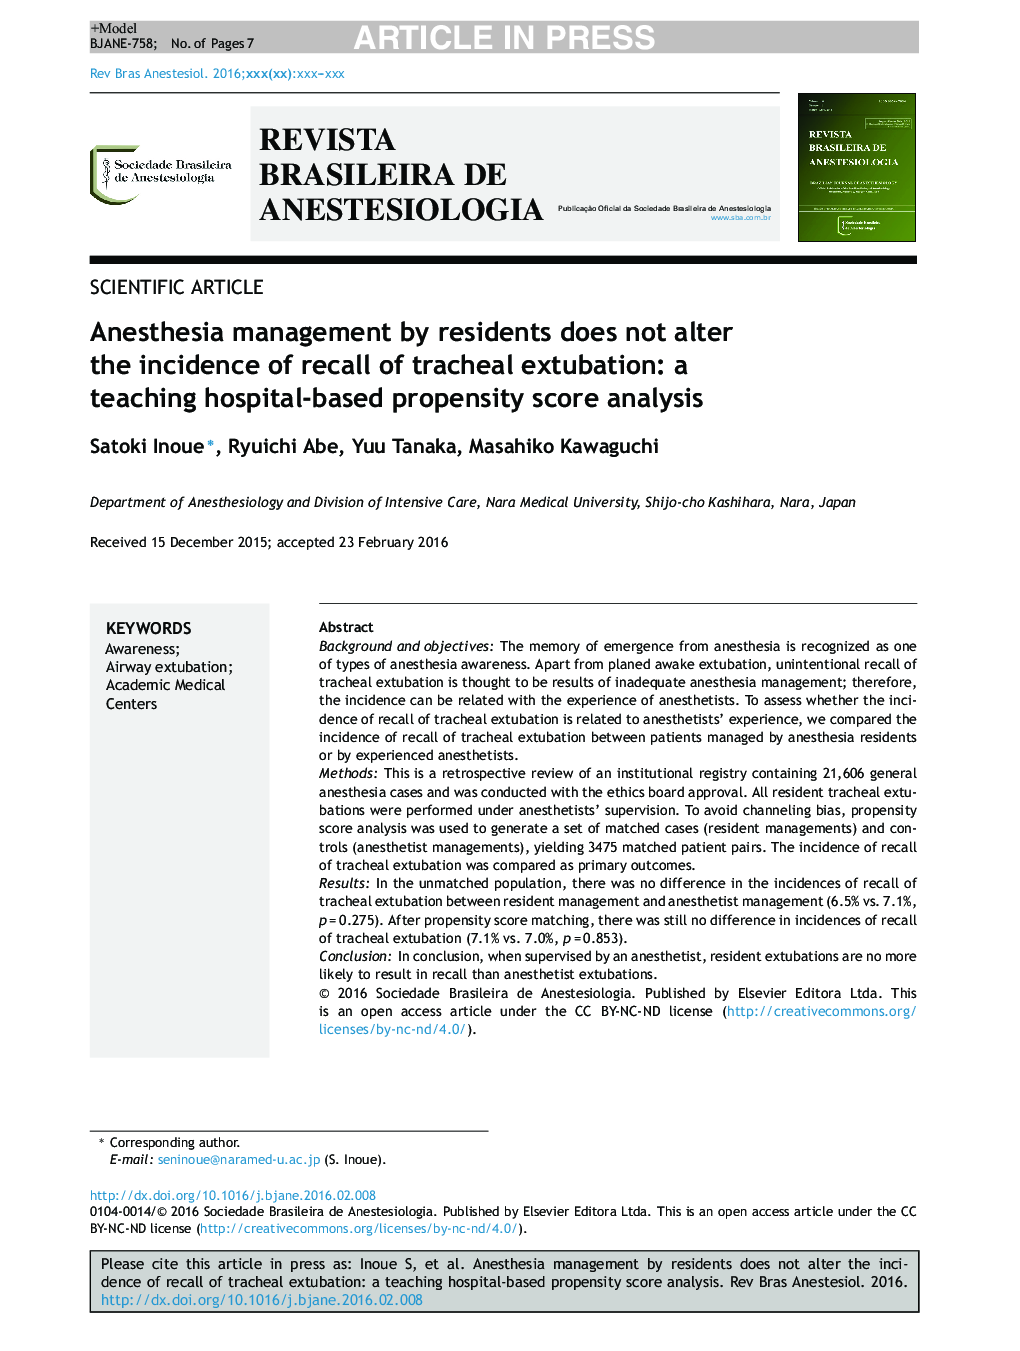 Anesthesia management by residents does not alter the incidence of recall of tracheal extubation: a teaching hospital-based propensity score analysis